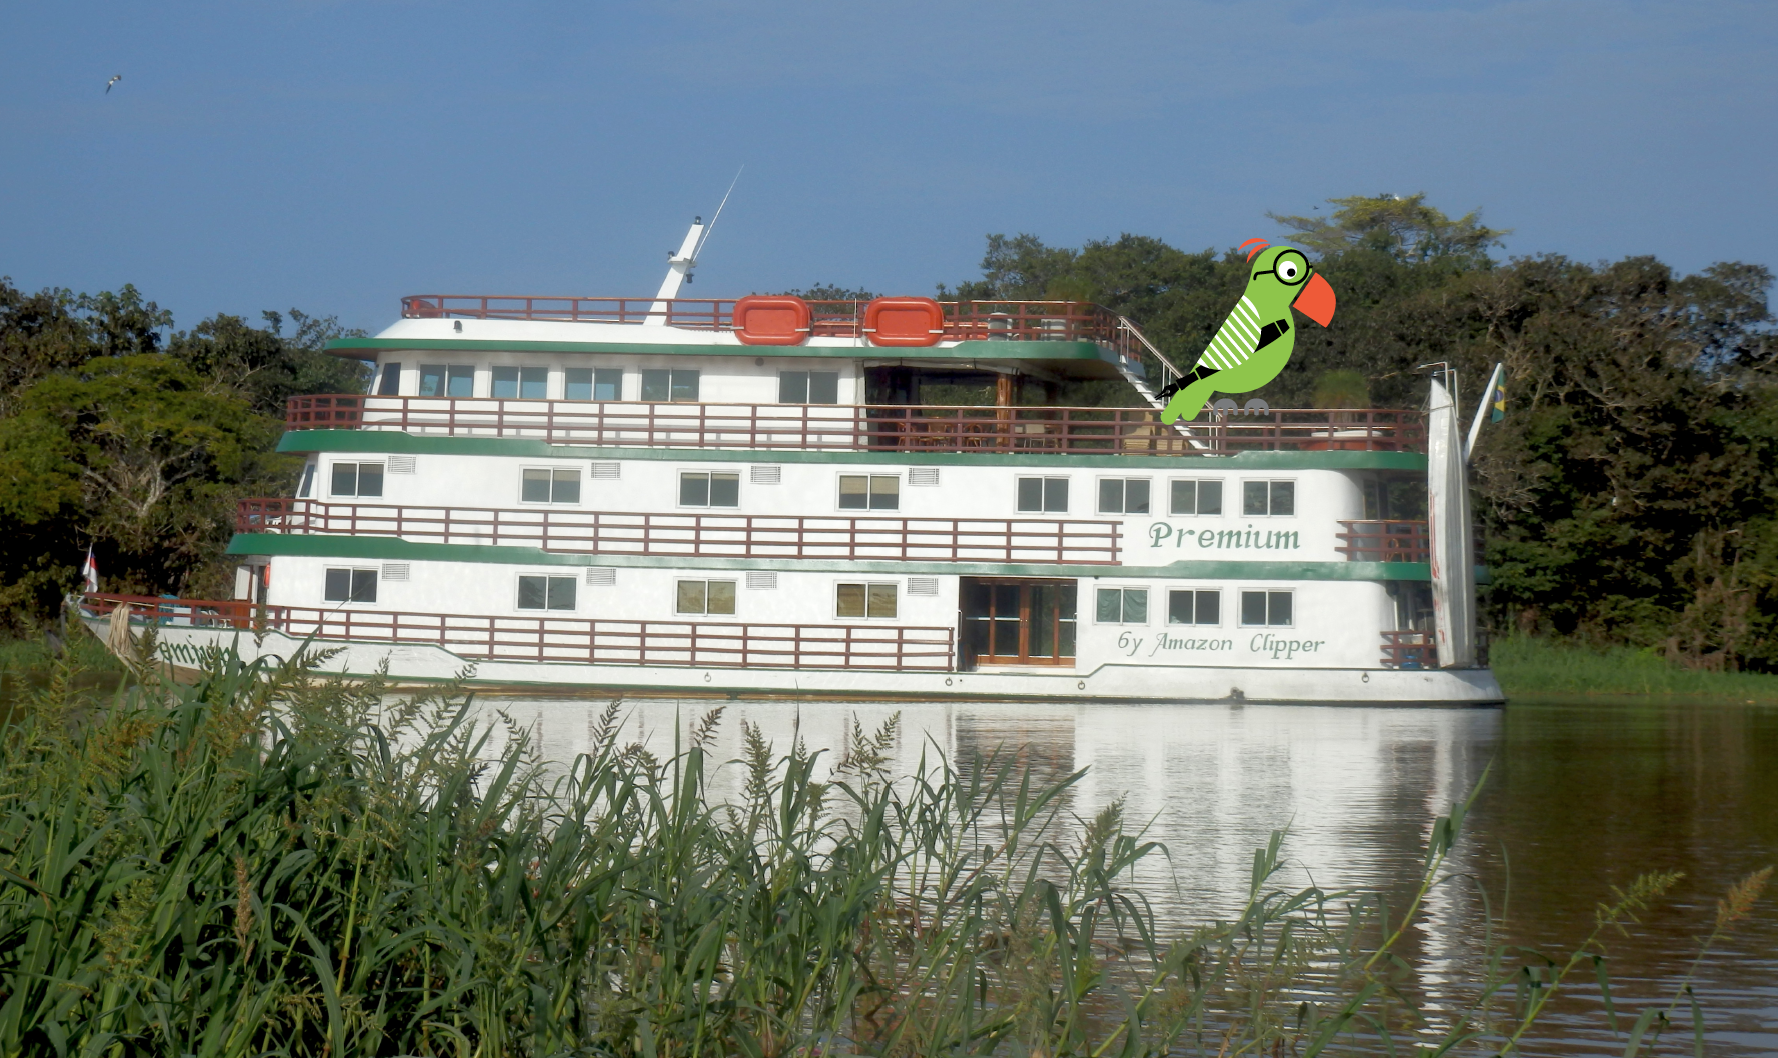 QuirkyCruise Reader Review: Premium on the Amazon River (AMAZON CLIPPER CRUISES)